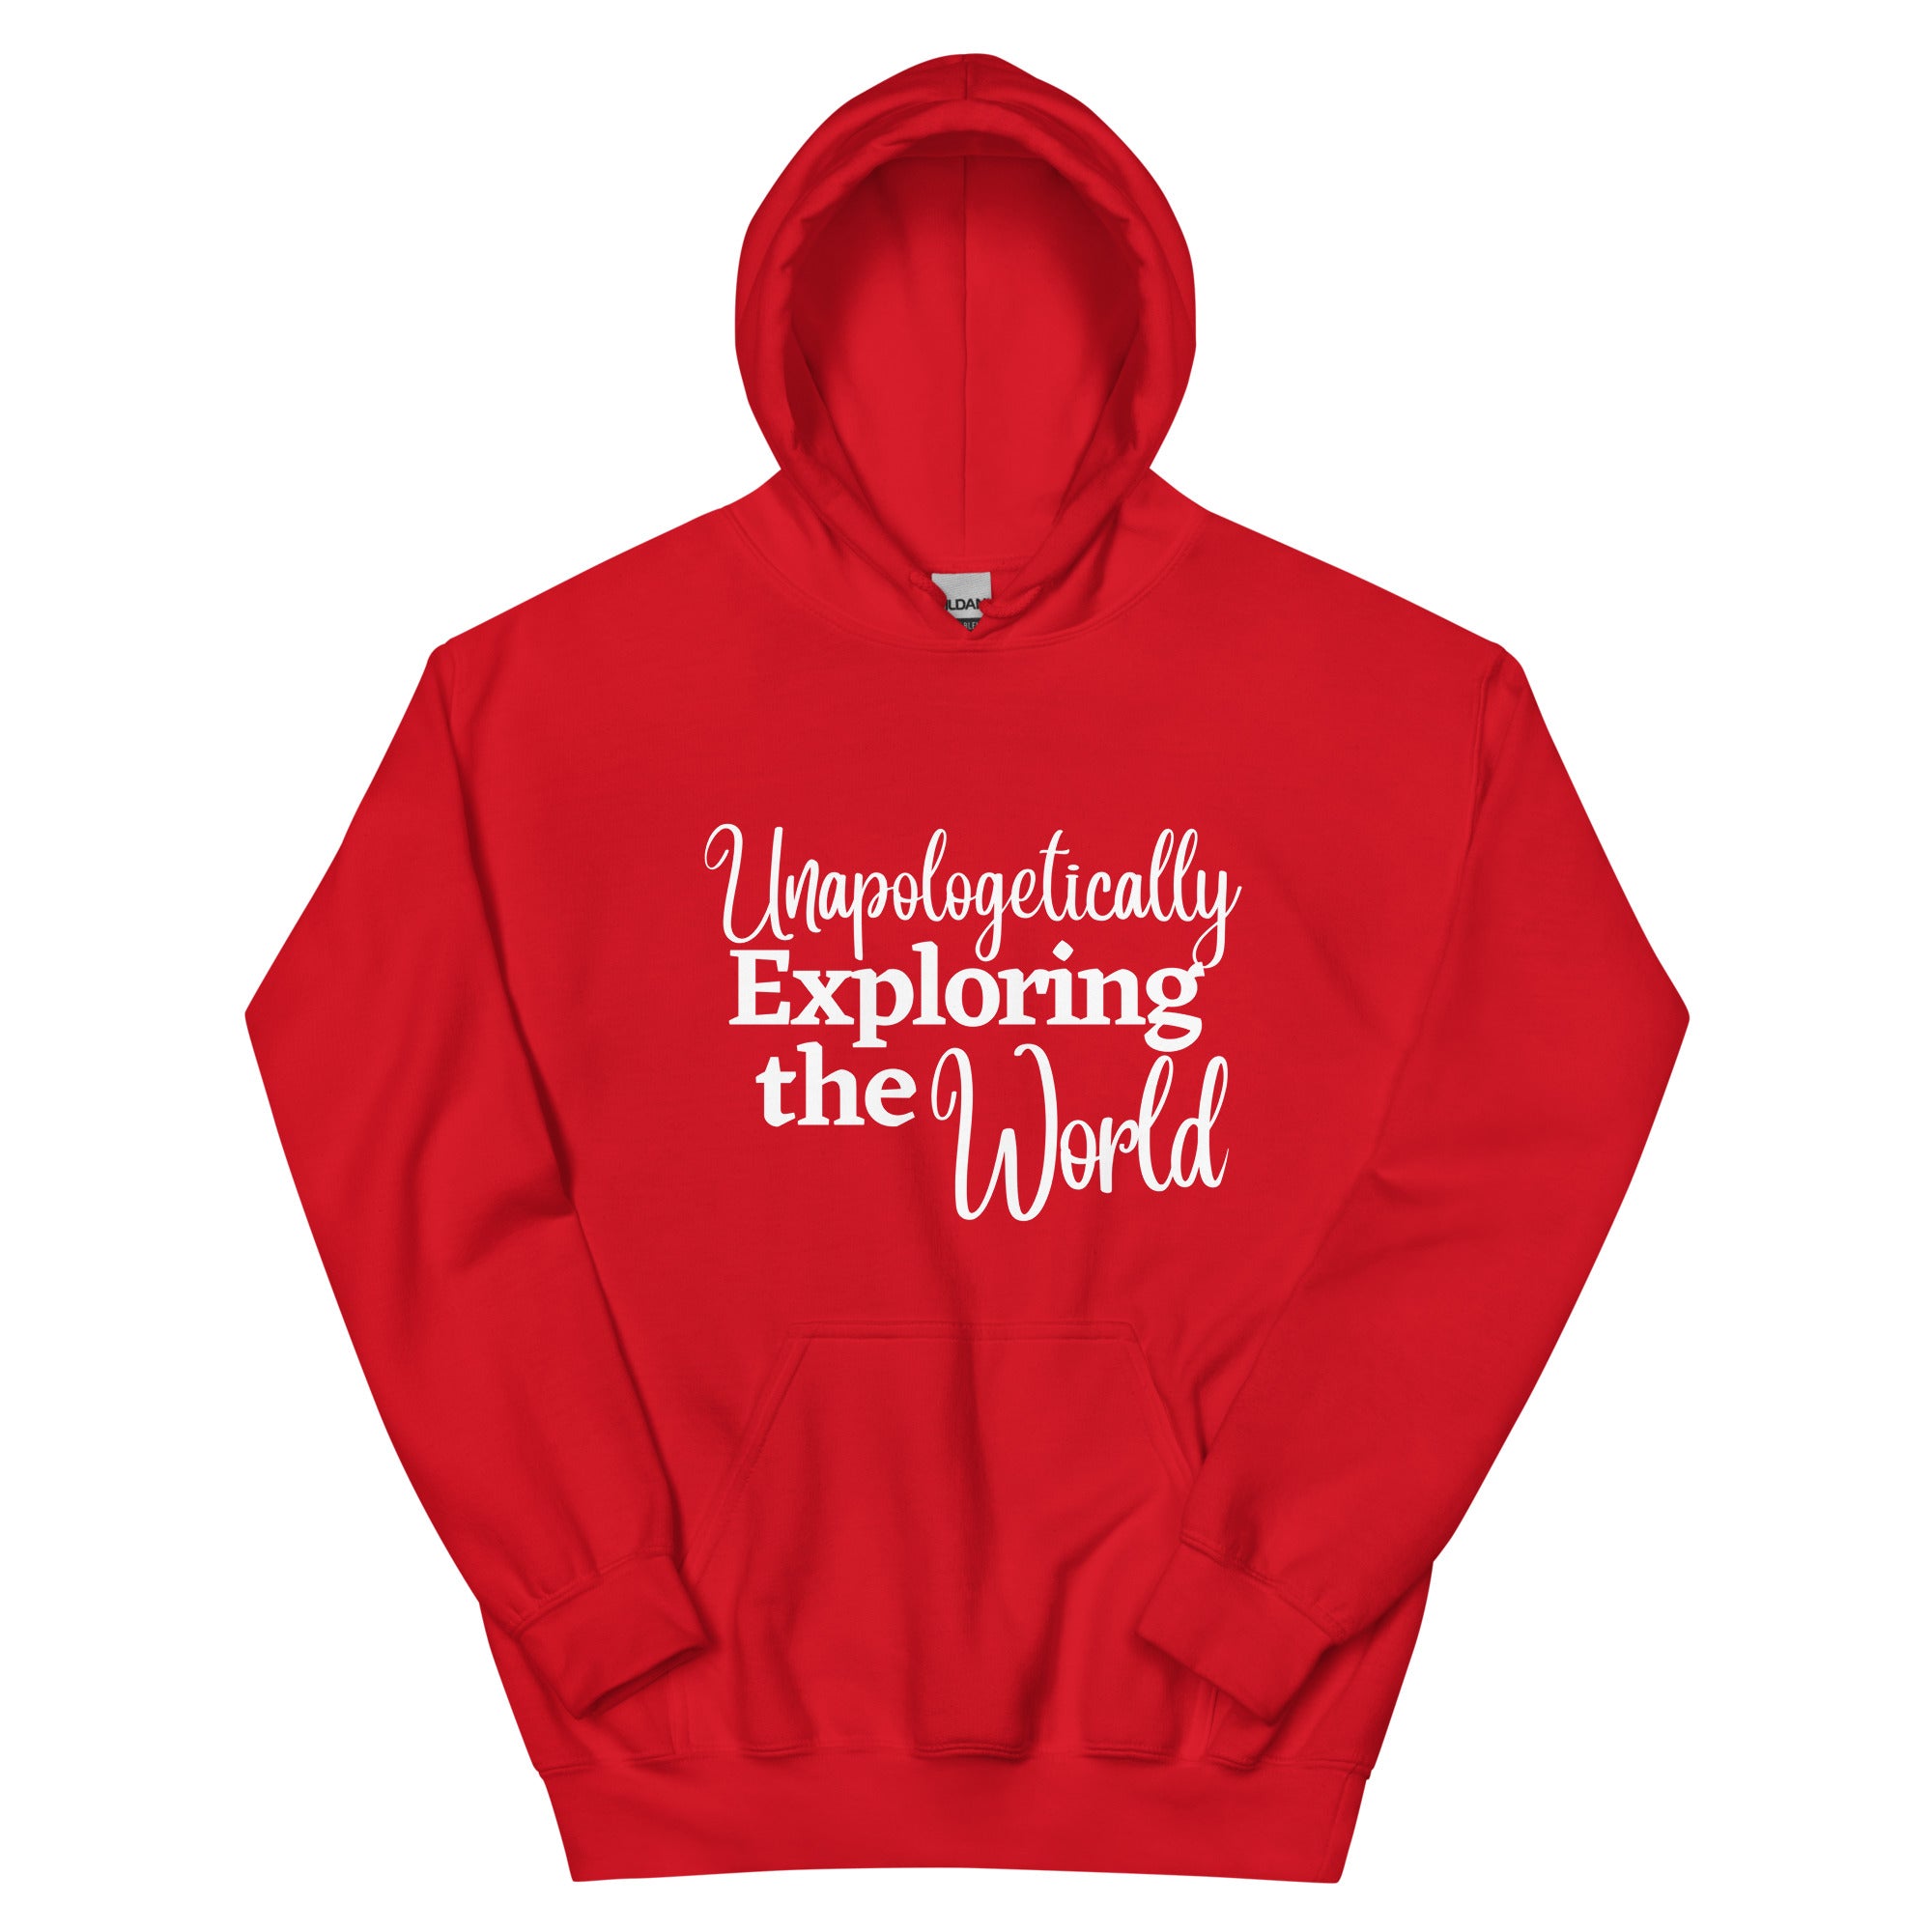 Unapologetically Exploring the World Unisex Hoodie